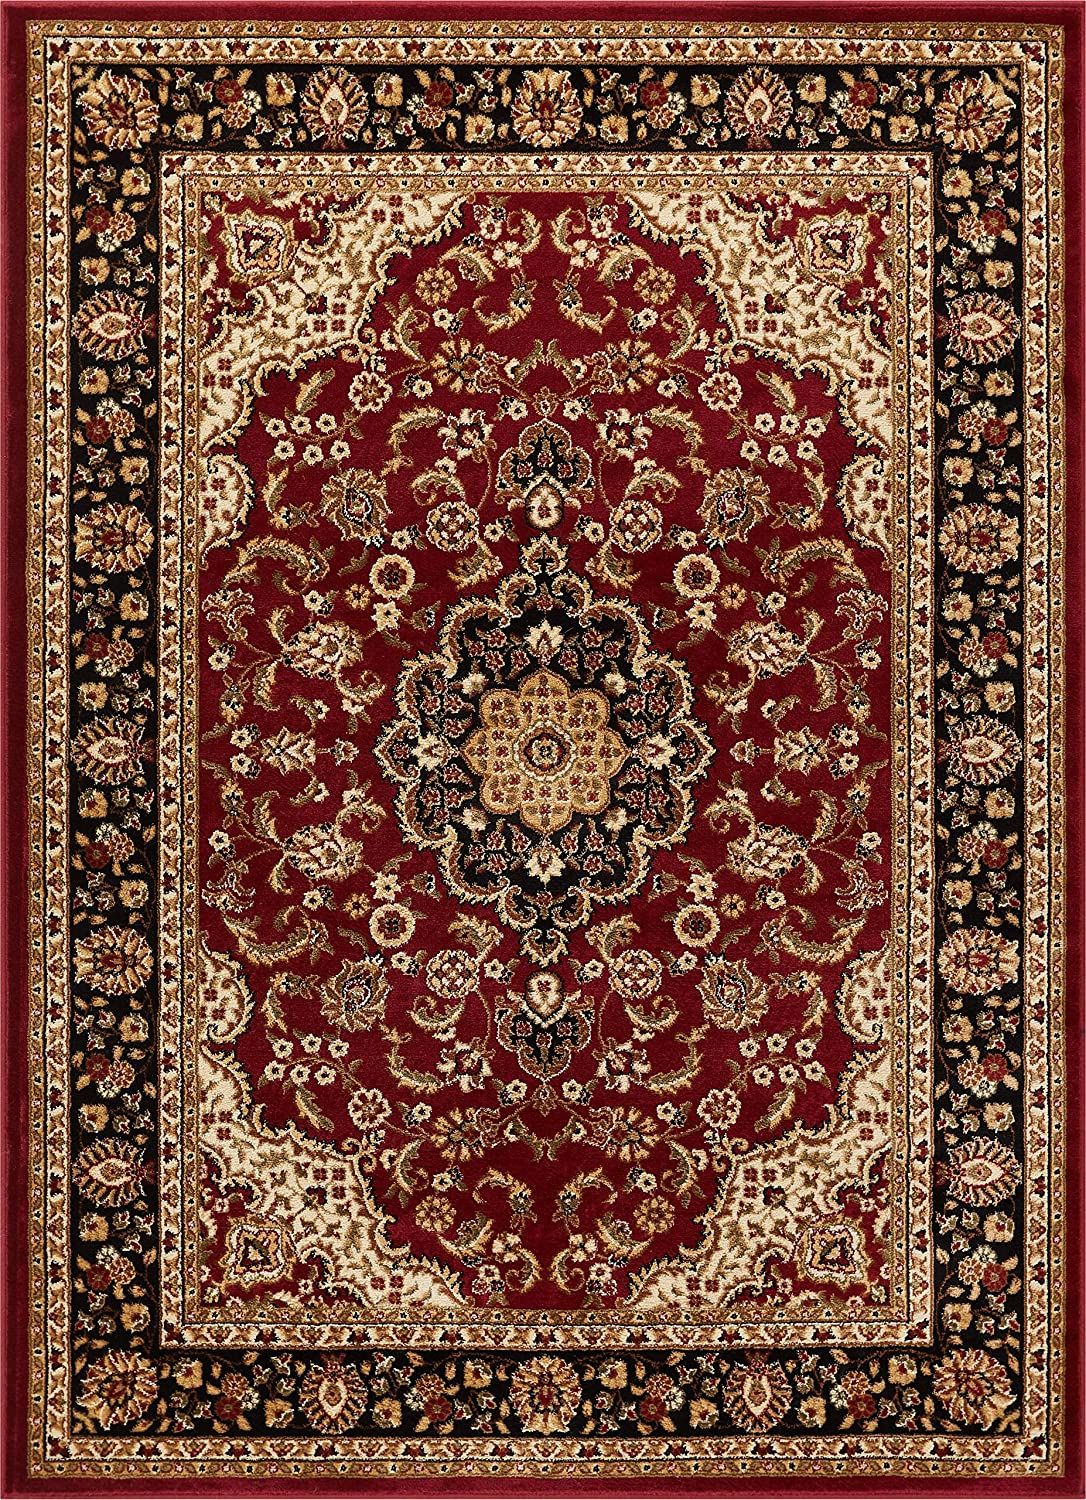 From across the ocean: persian carpets